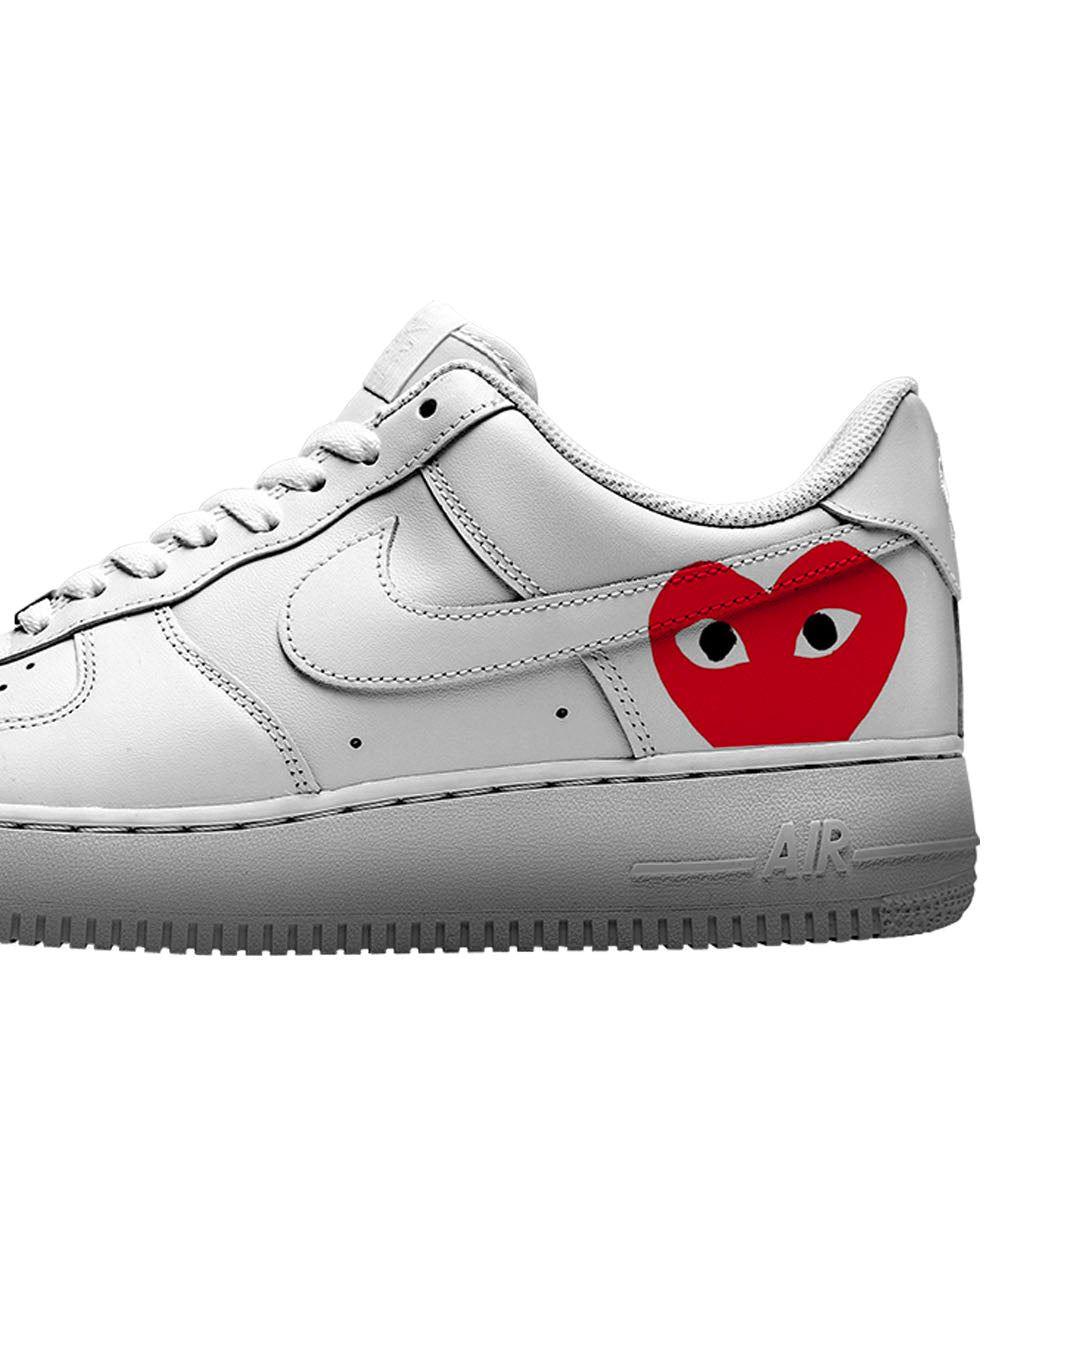 Nike Air Force 1 'Red Heart'